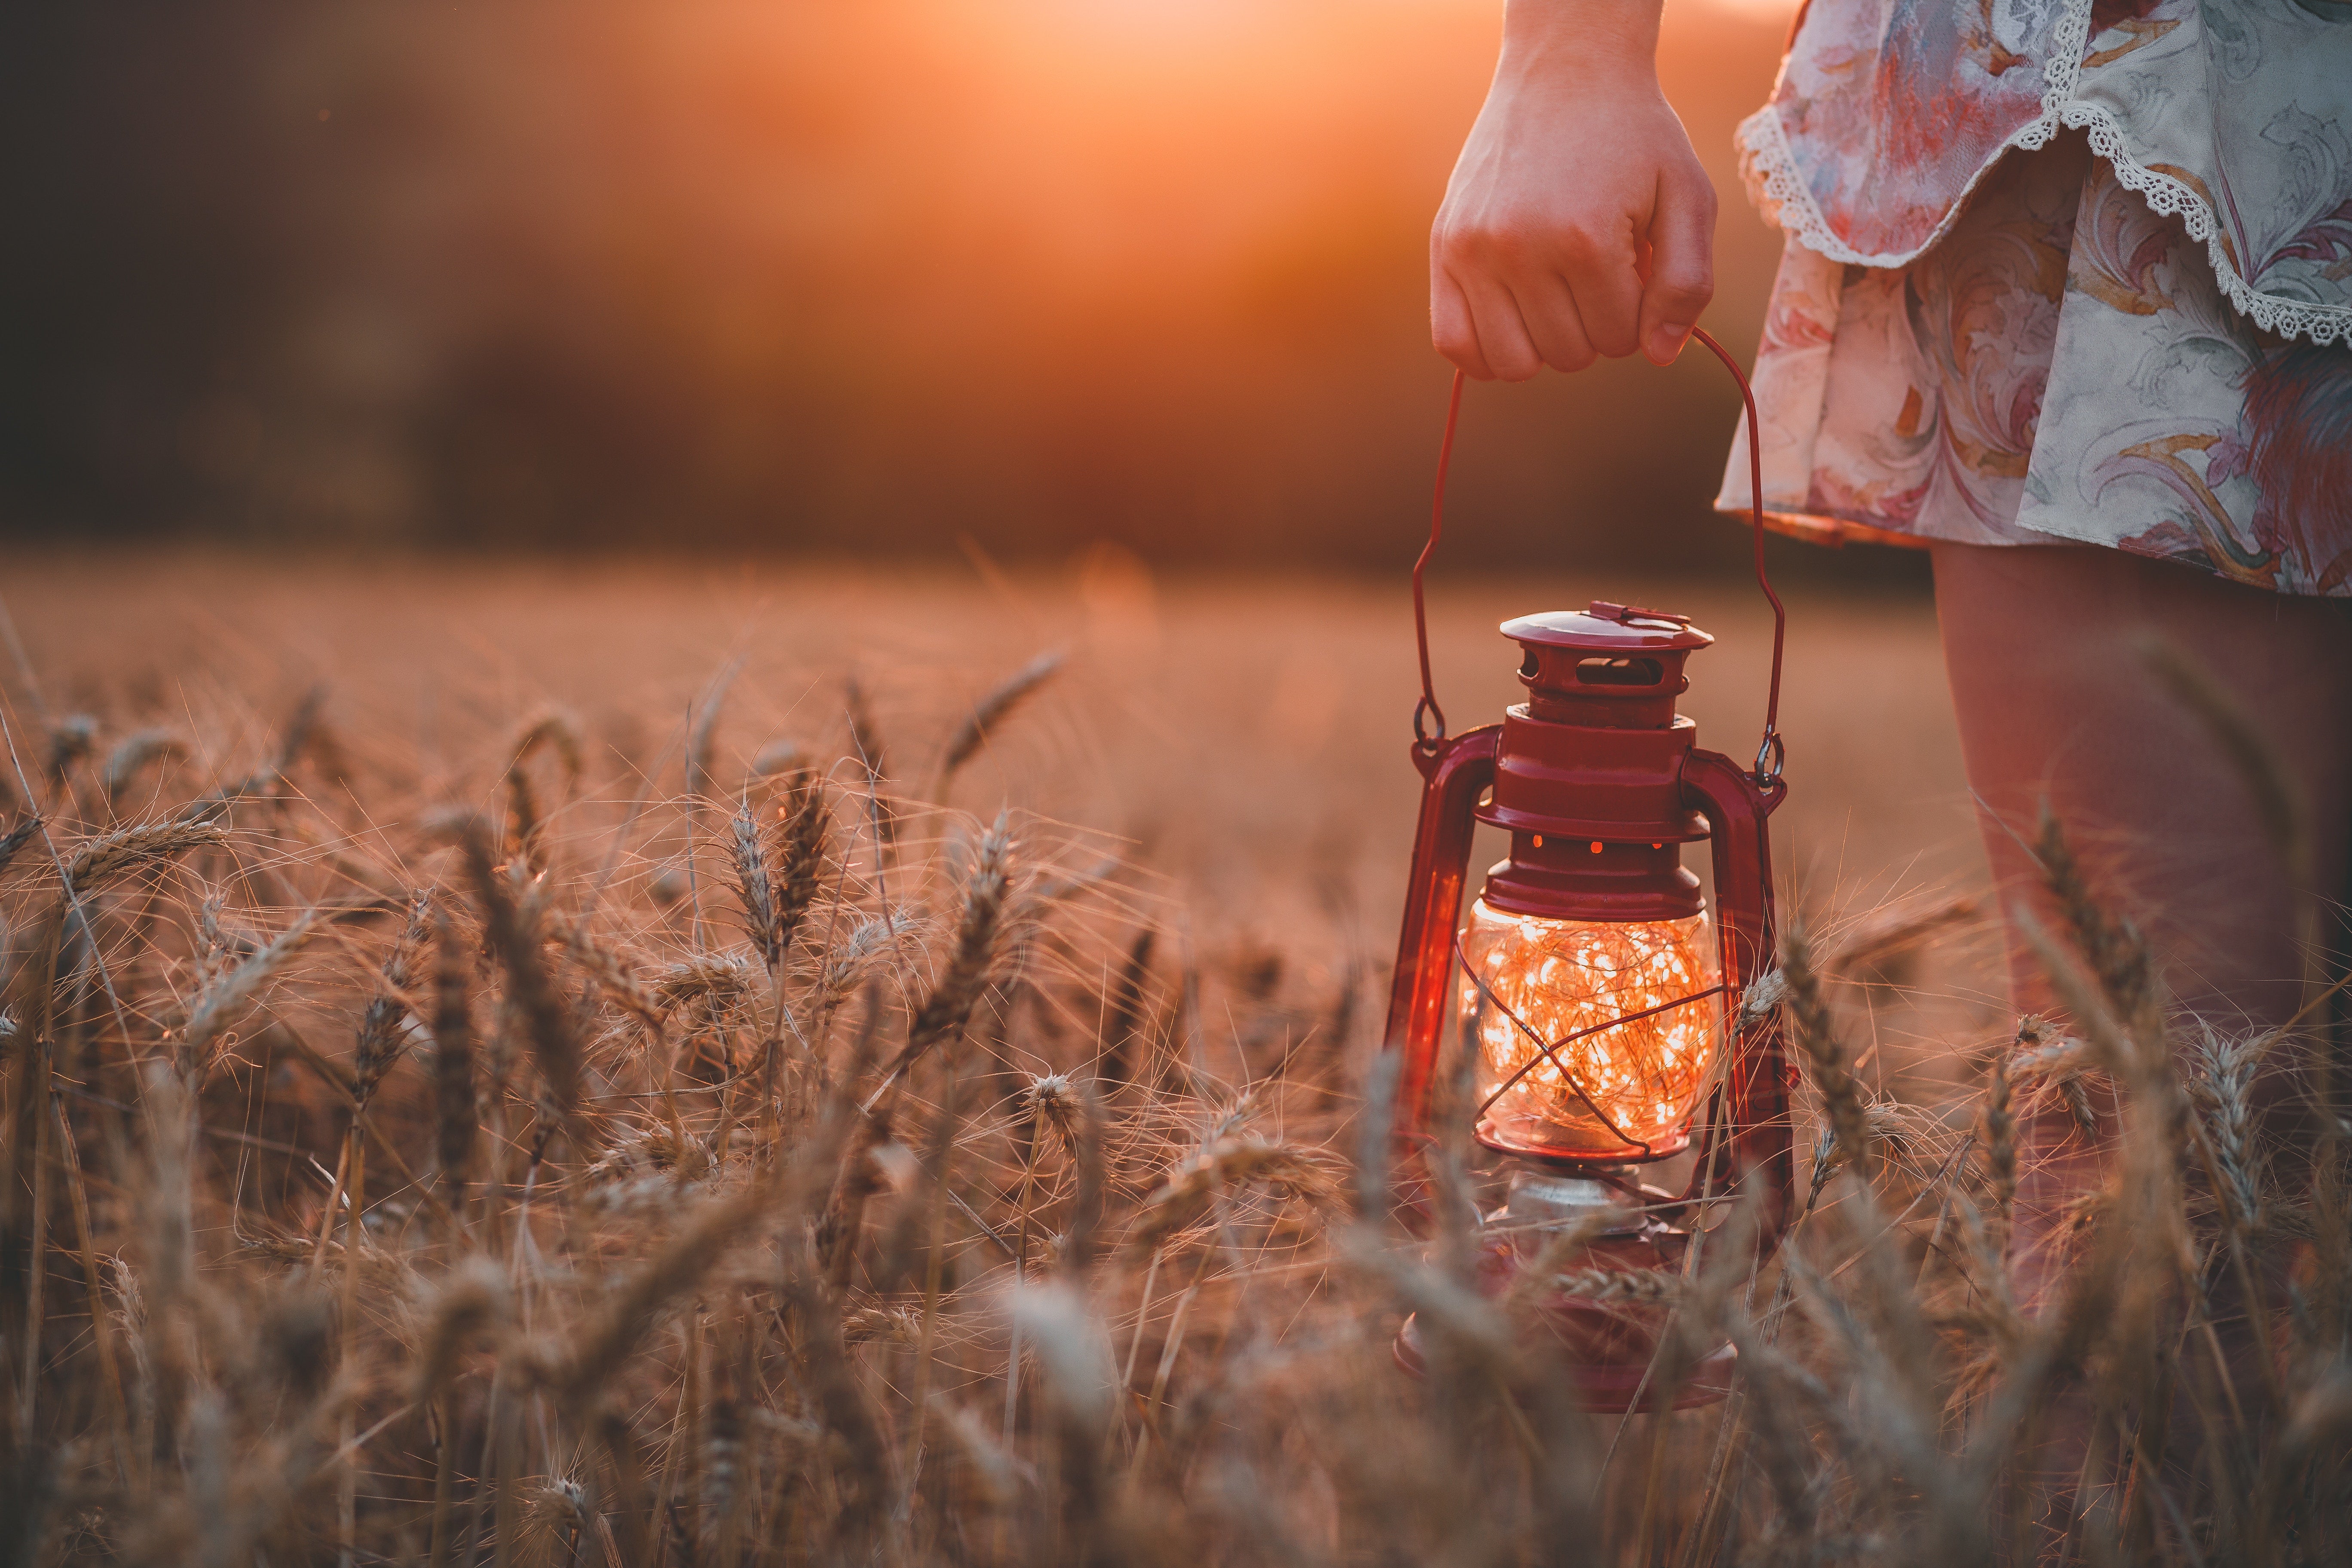 Girl holding a lantern in a field of wheat at sunset